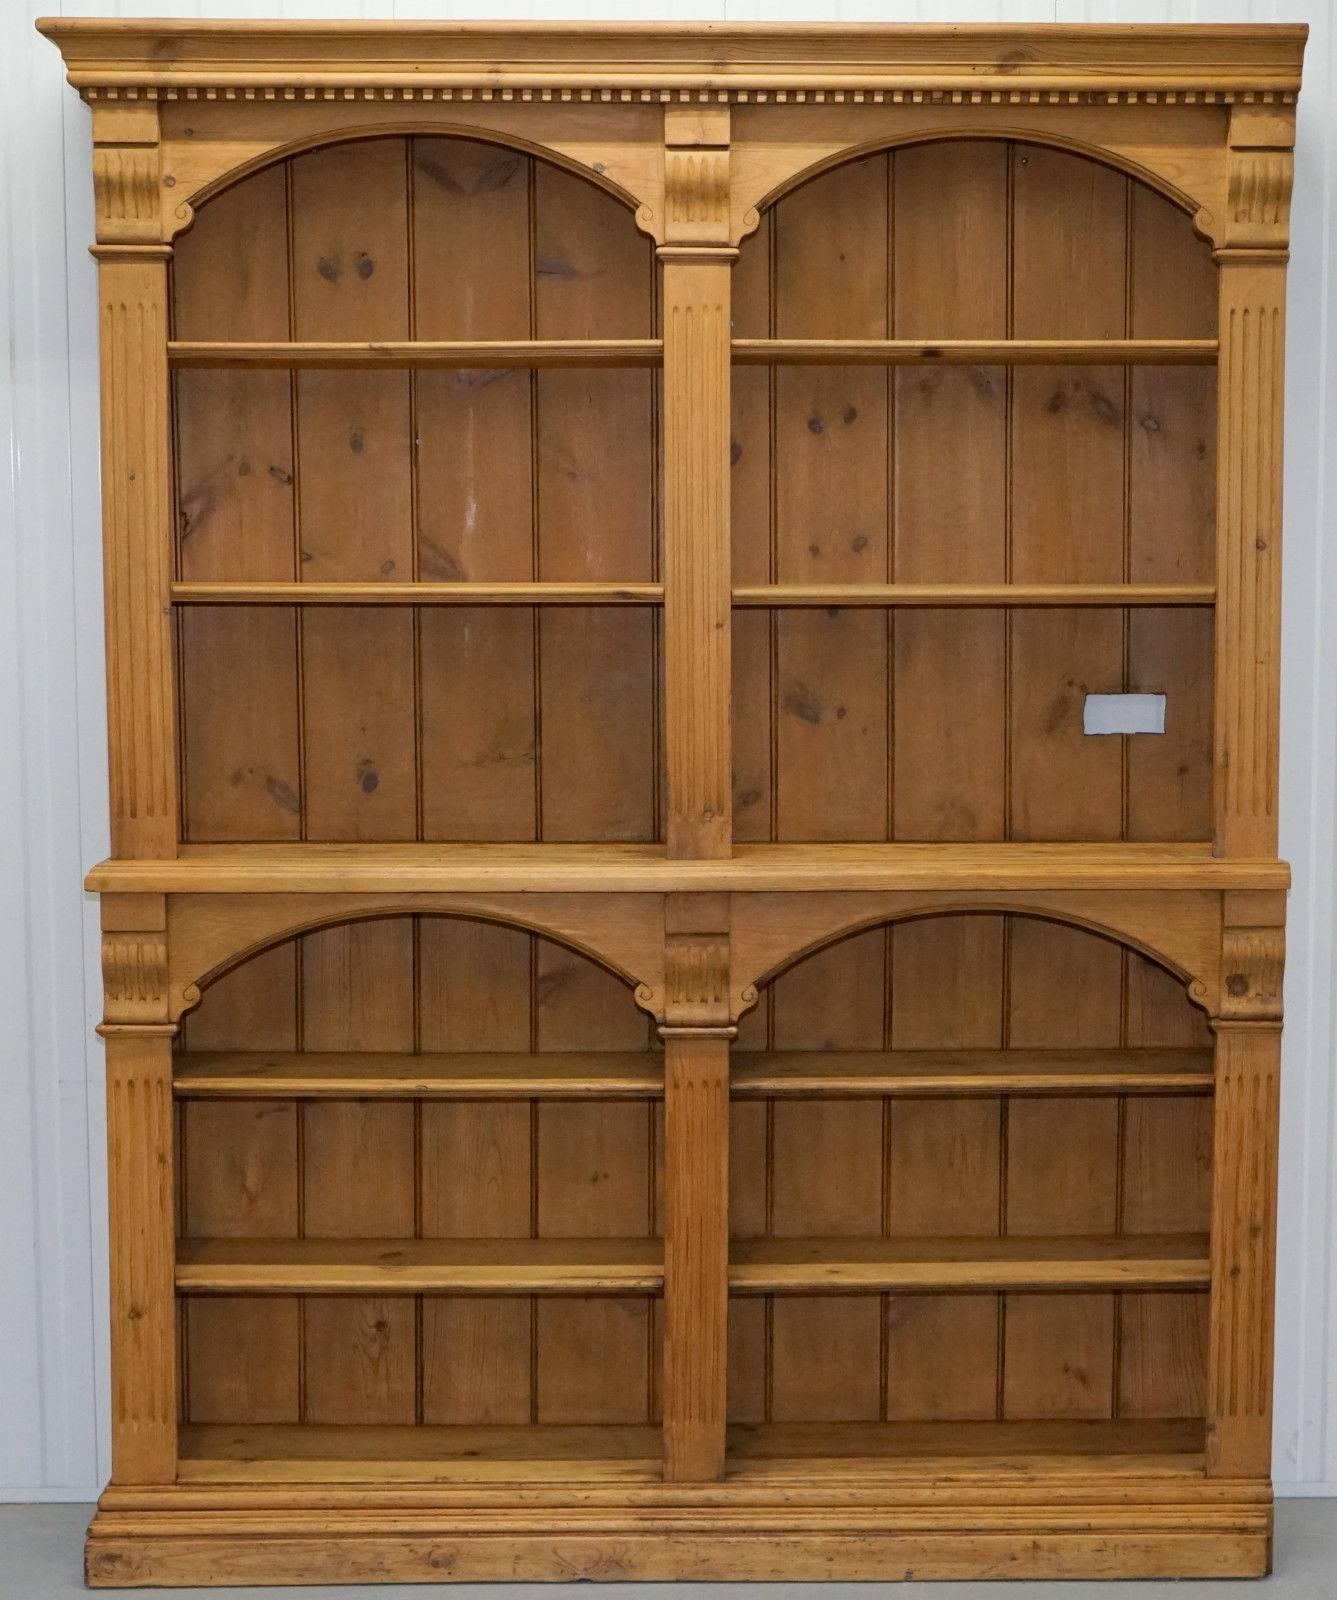 We are delighted to offer for sale this lovely antique salvaged and restored antique solid oak bookcase that came from an old Victorian bar

Please note the delivery fee listed is just a guide, for an accurate quote please send me your postcode and